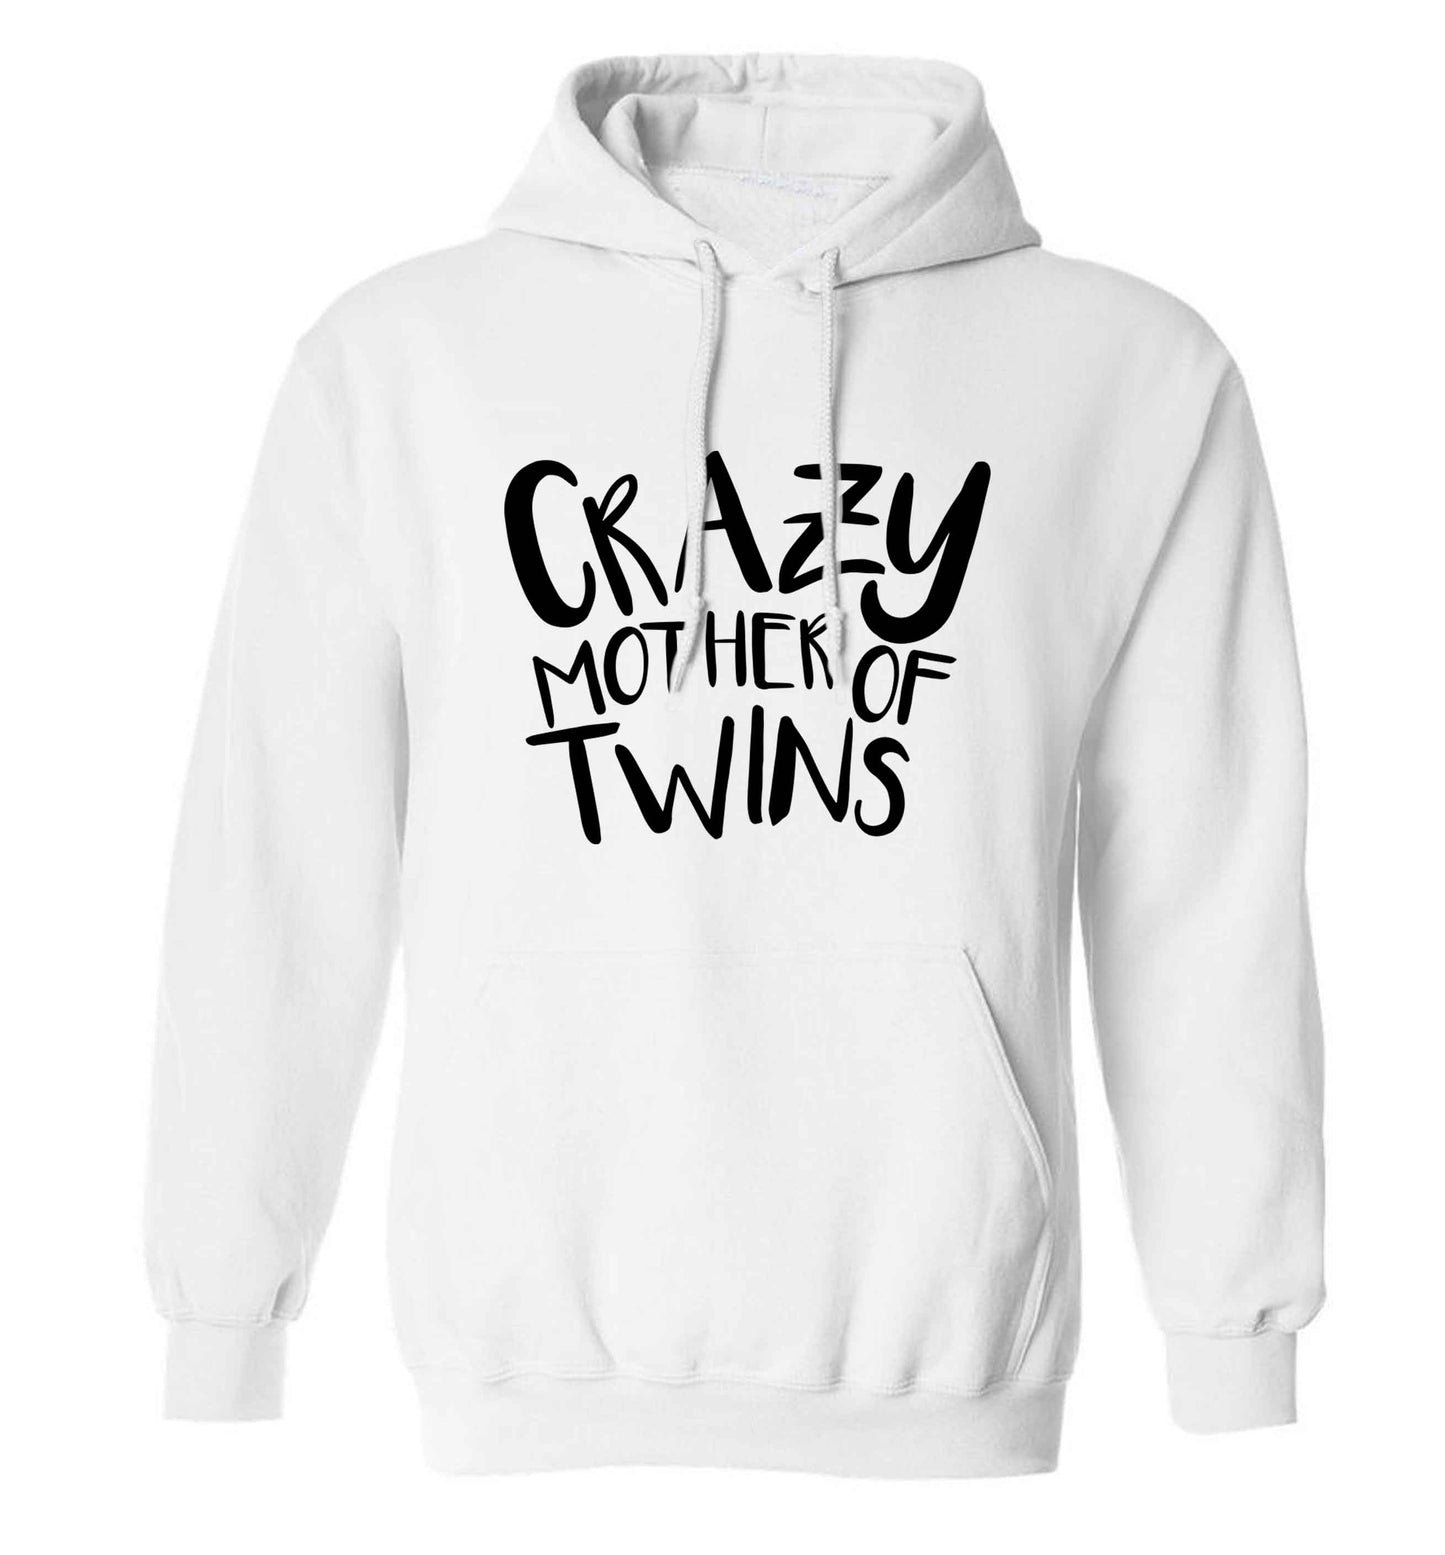 Crazy mother of twins adults unisex white hoodie 2XL